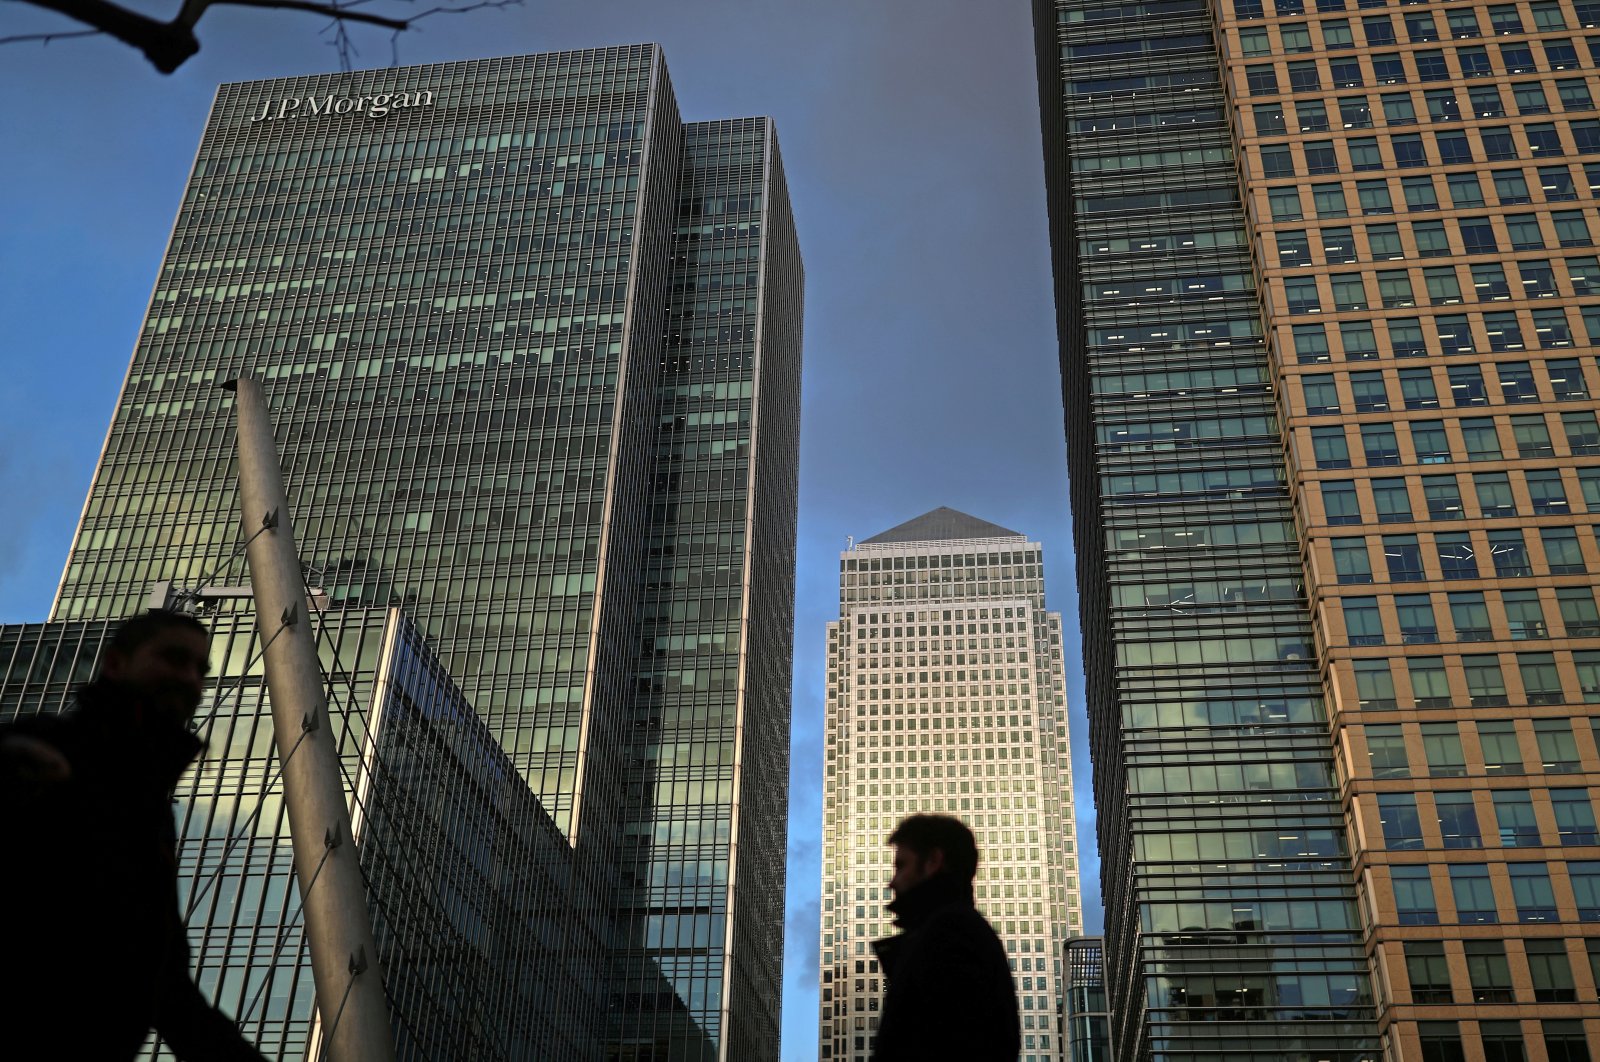 People walk through the Canary Wharf financial district of London, Britain, Dec. 7, 2018. (Reuters Photo)